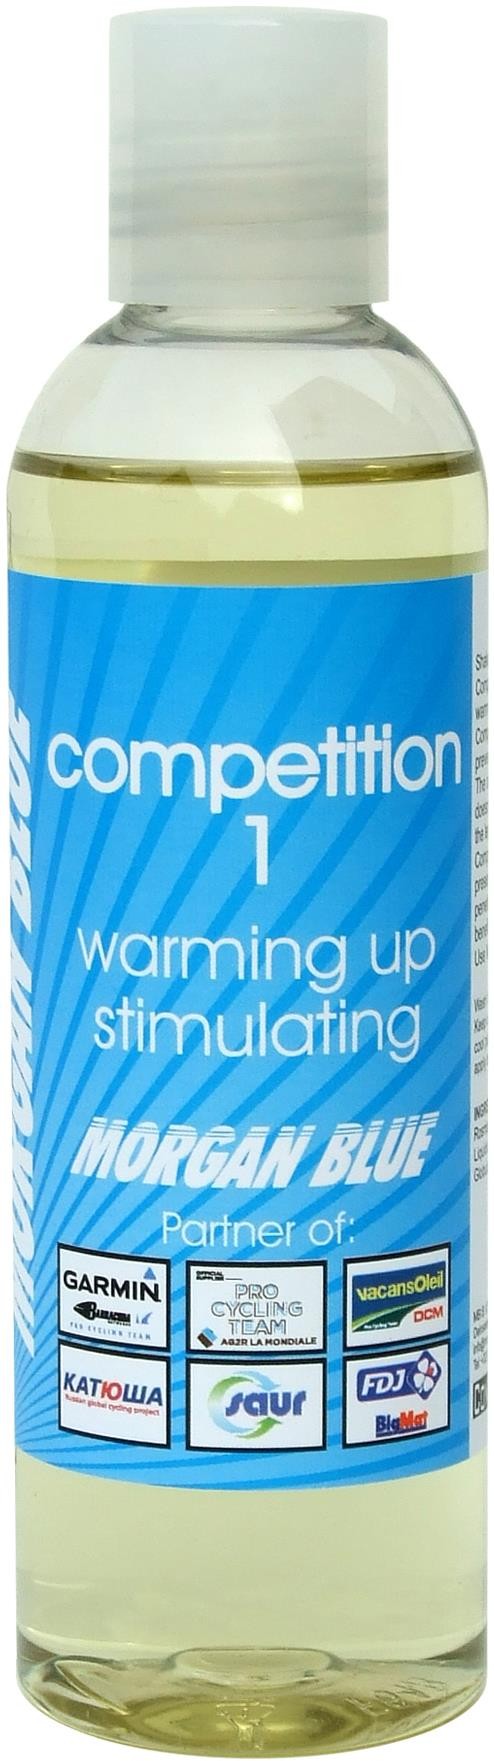 Competition 1 Massage Oil image 0